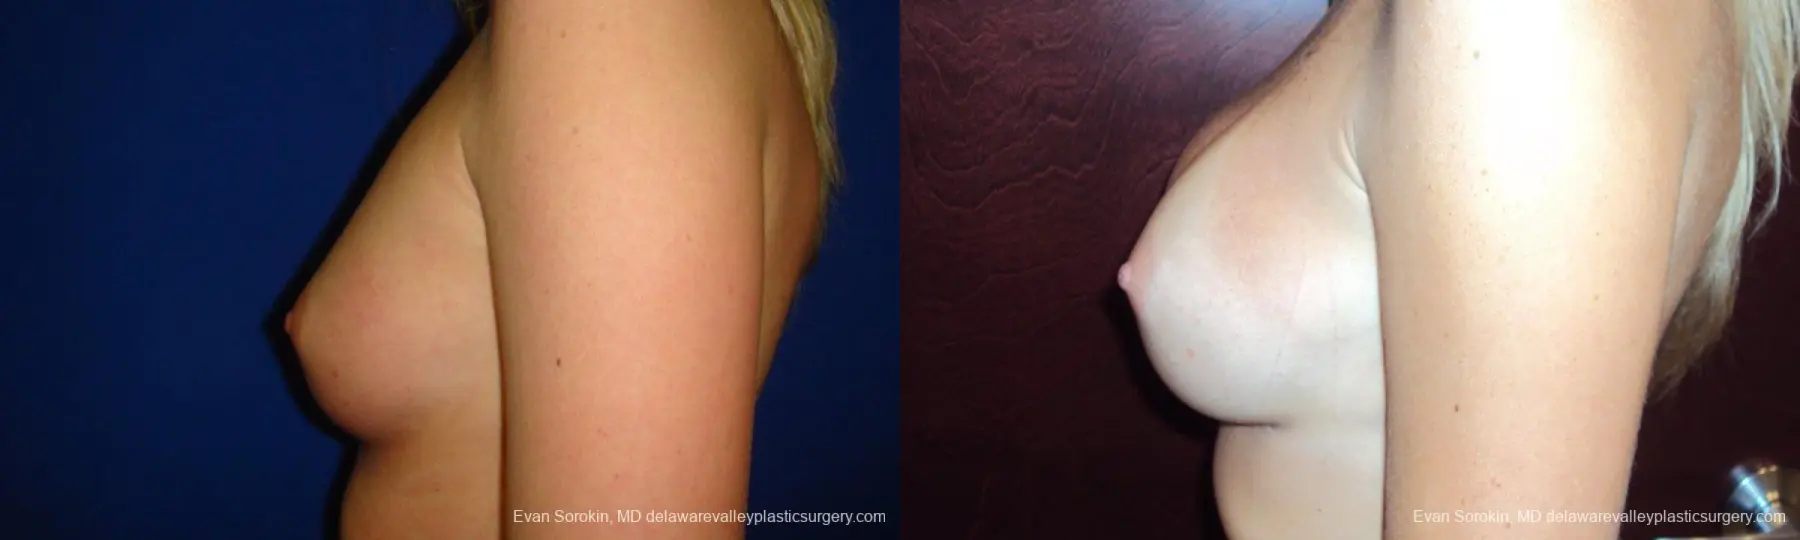 Philadelphia Breast Augmentation 9293 - Before and After 5